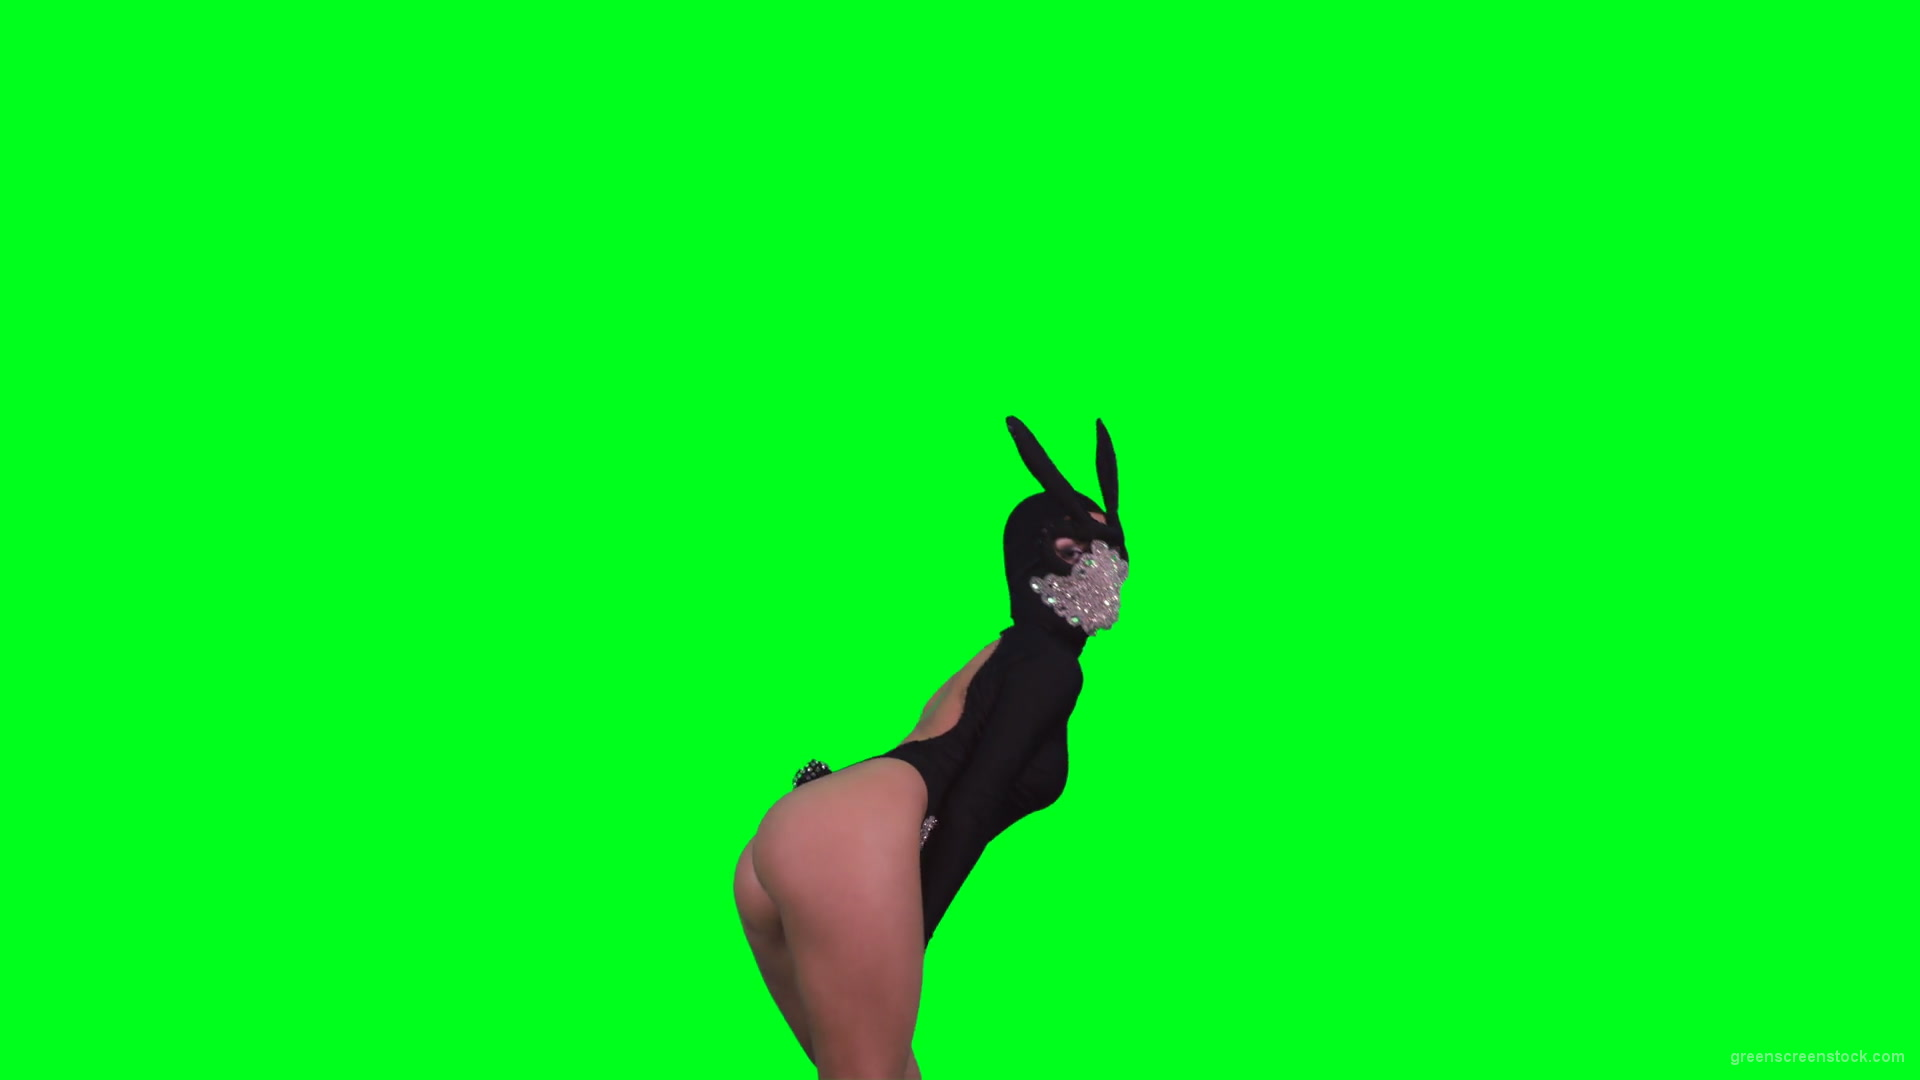 Sexy-Bunny-Girl-in-Rabbit-black-mask-chilling-with-animal-instict-isolated-on-green-screen-4K-Video-Footage-1920_002 Green Screen Stock